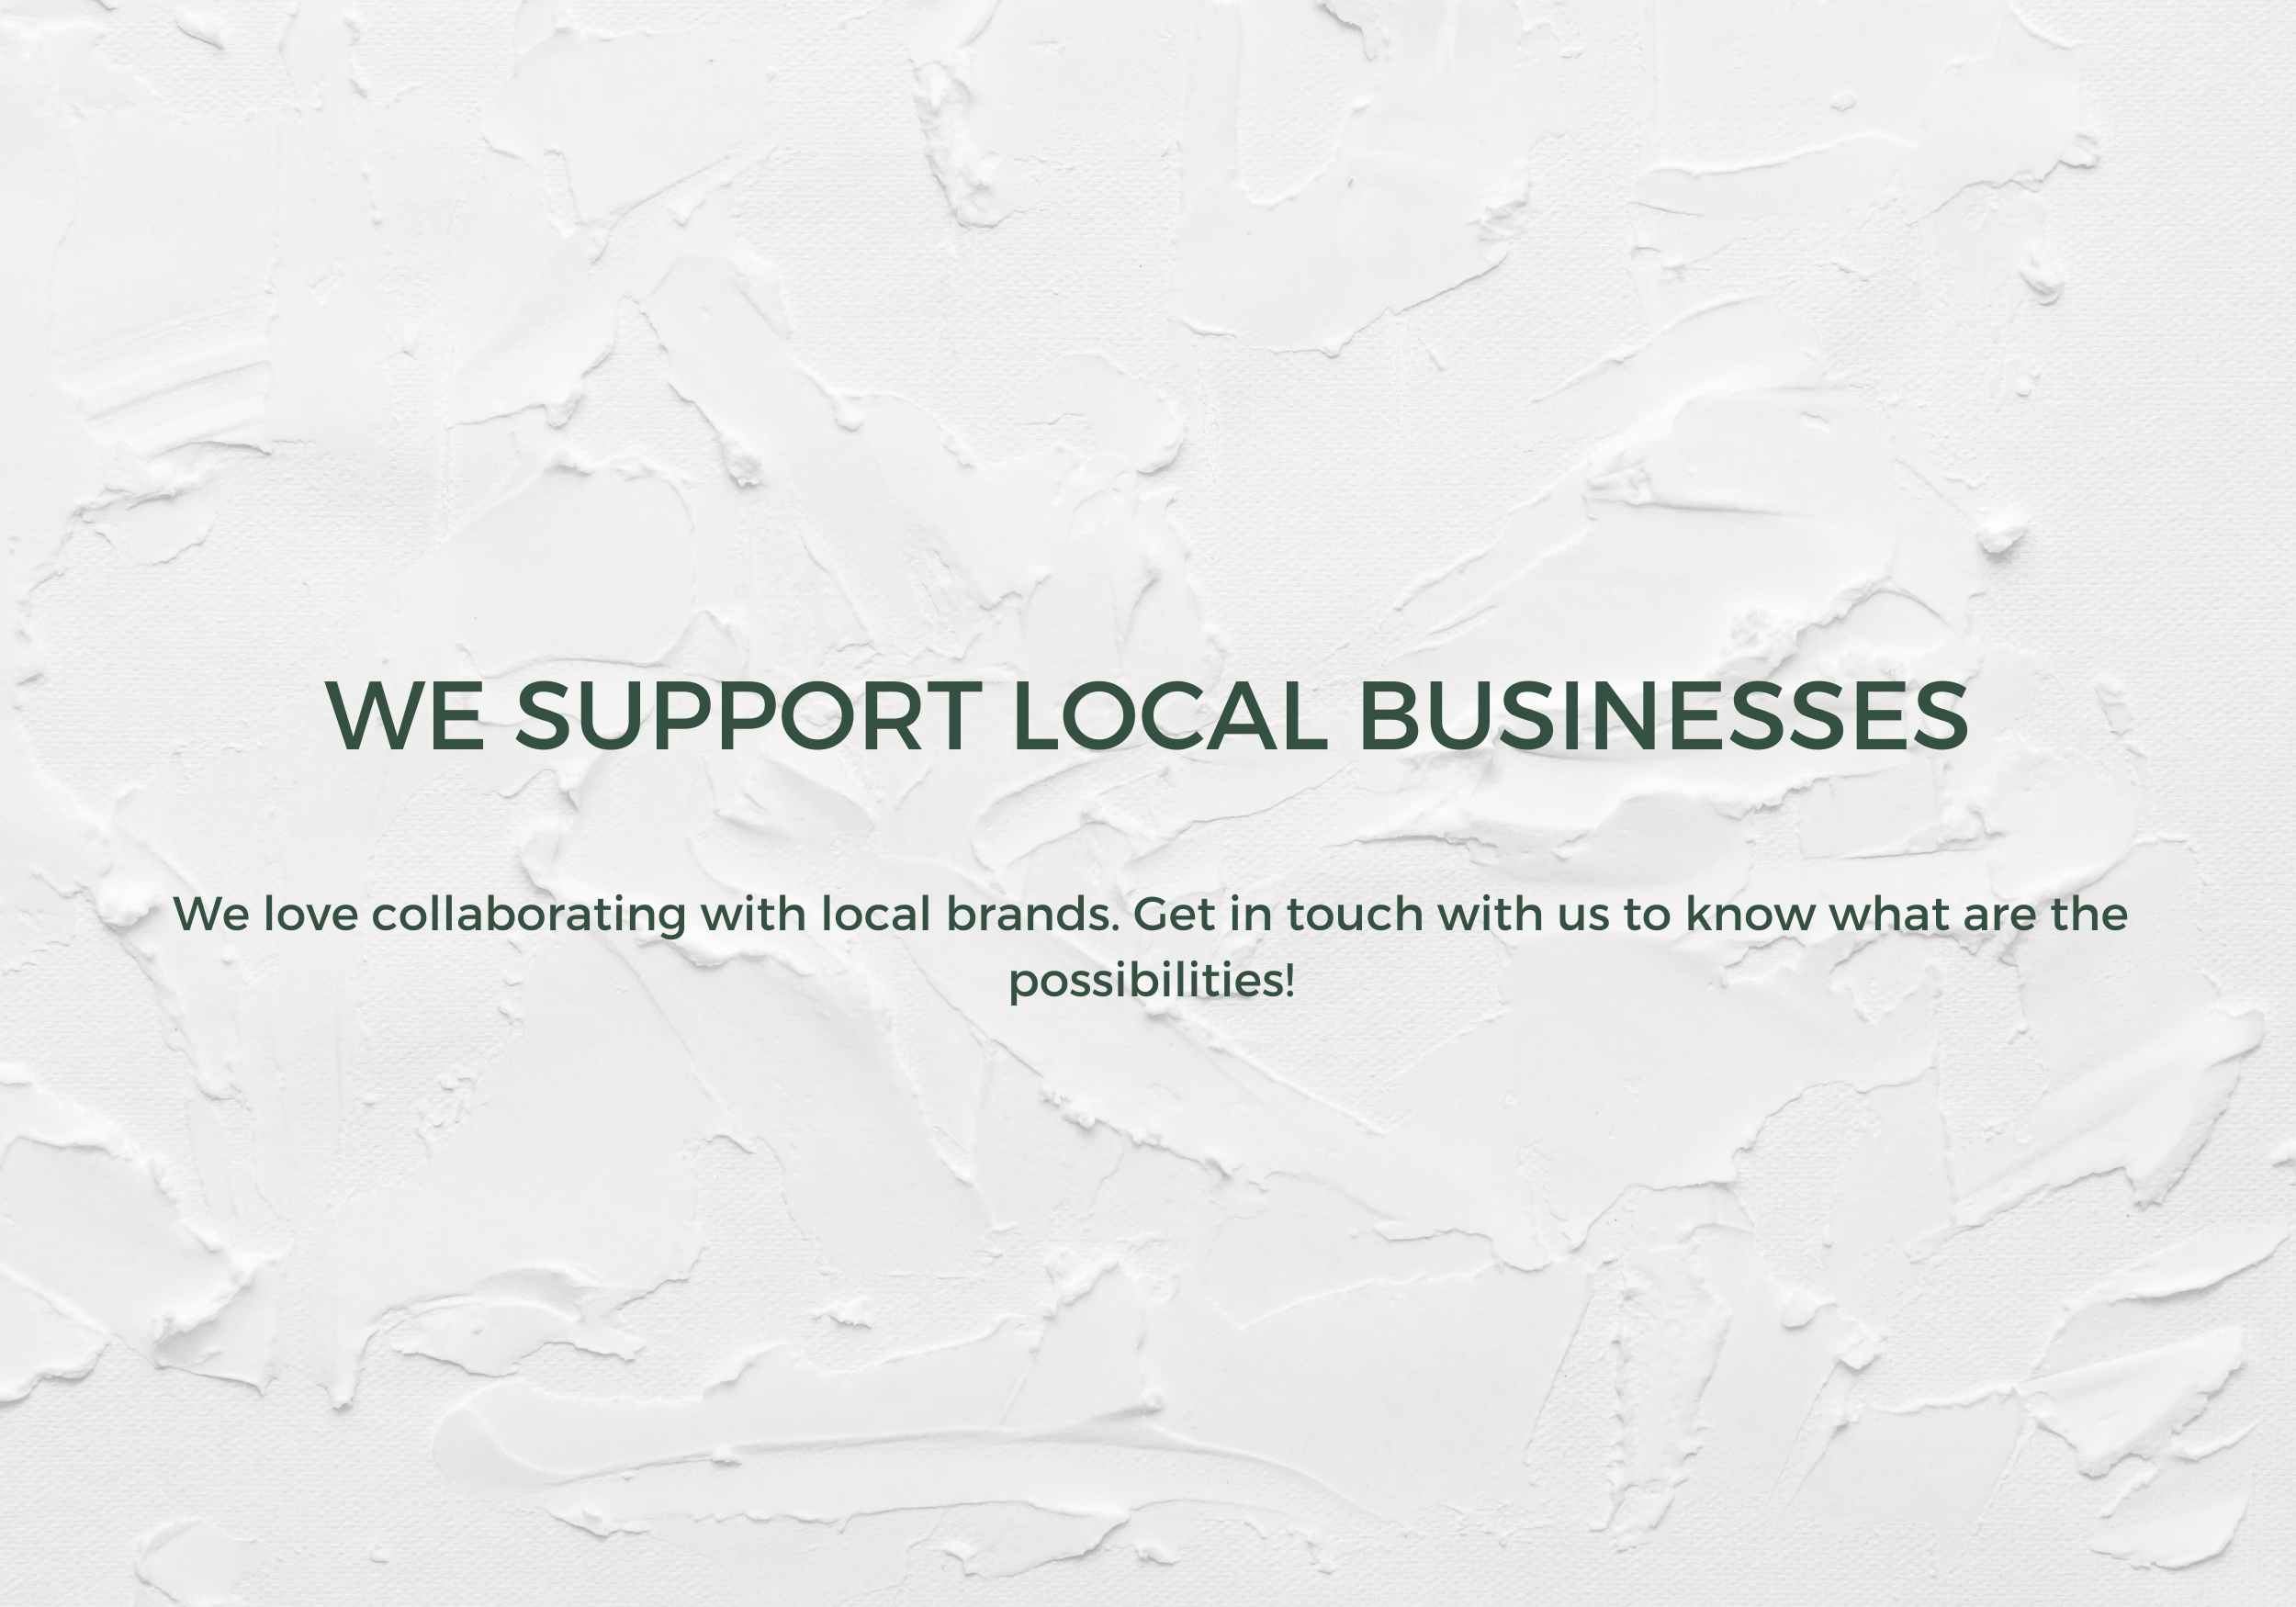 We support local businesses